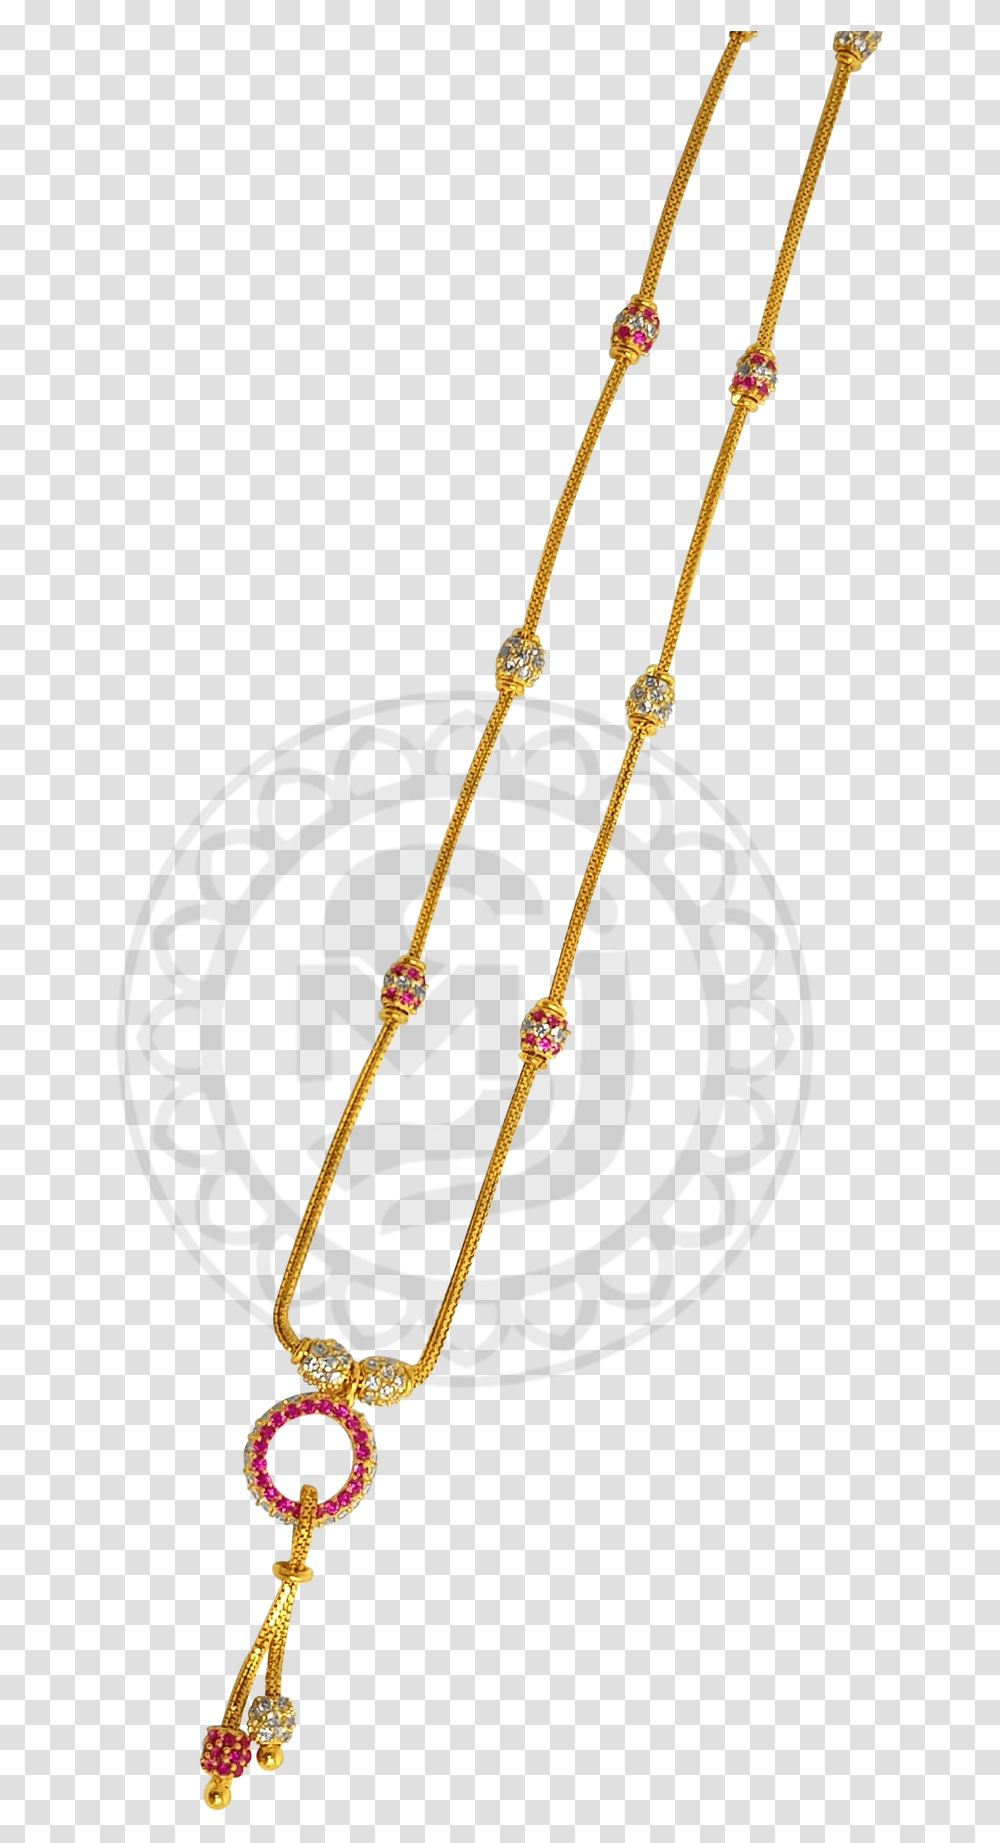 Chain Illustration, Rope, Necklace, Jewelry, Accessories Transparent Png